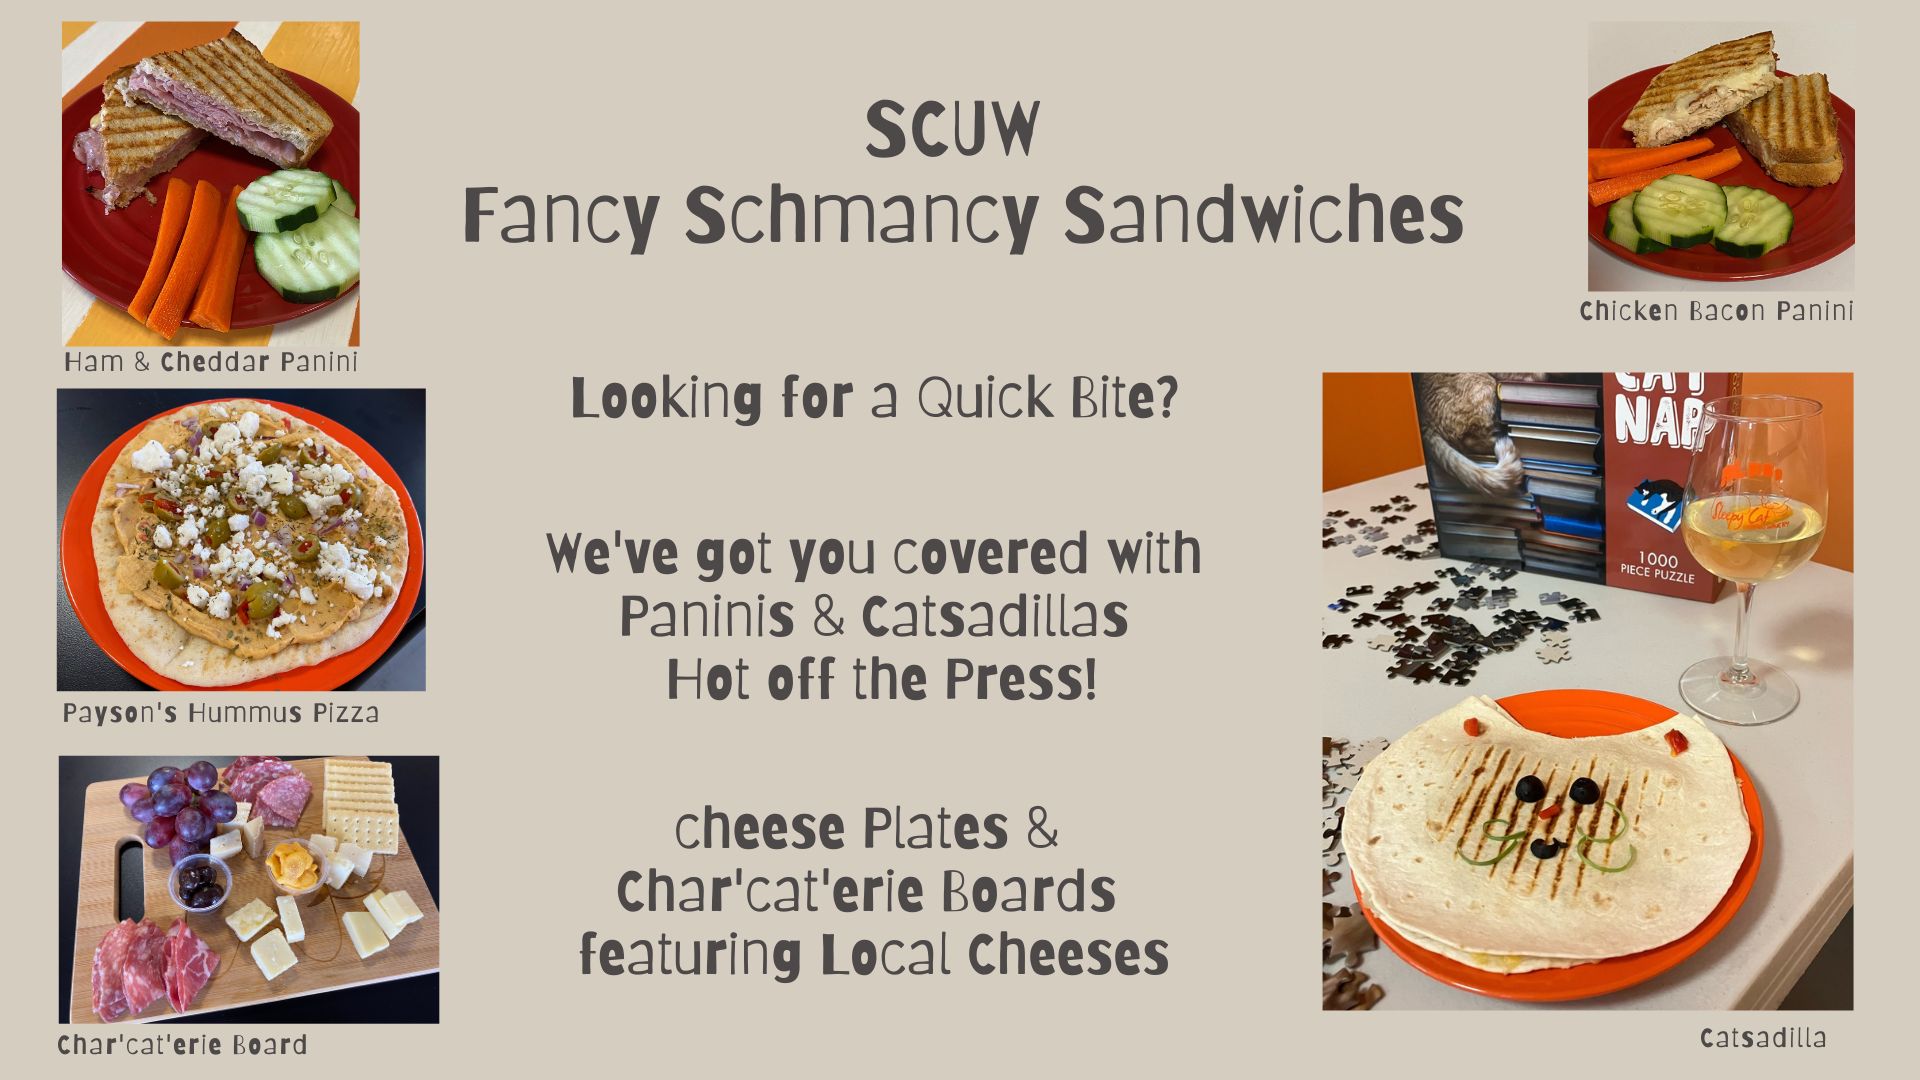 You are currently viewing SCUW Fancy Schmancy Sandwiches